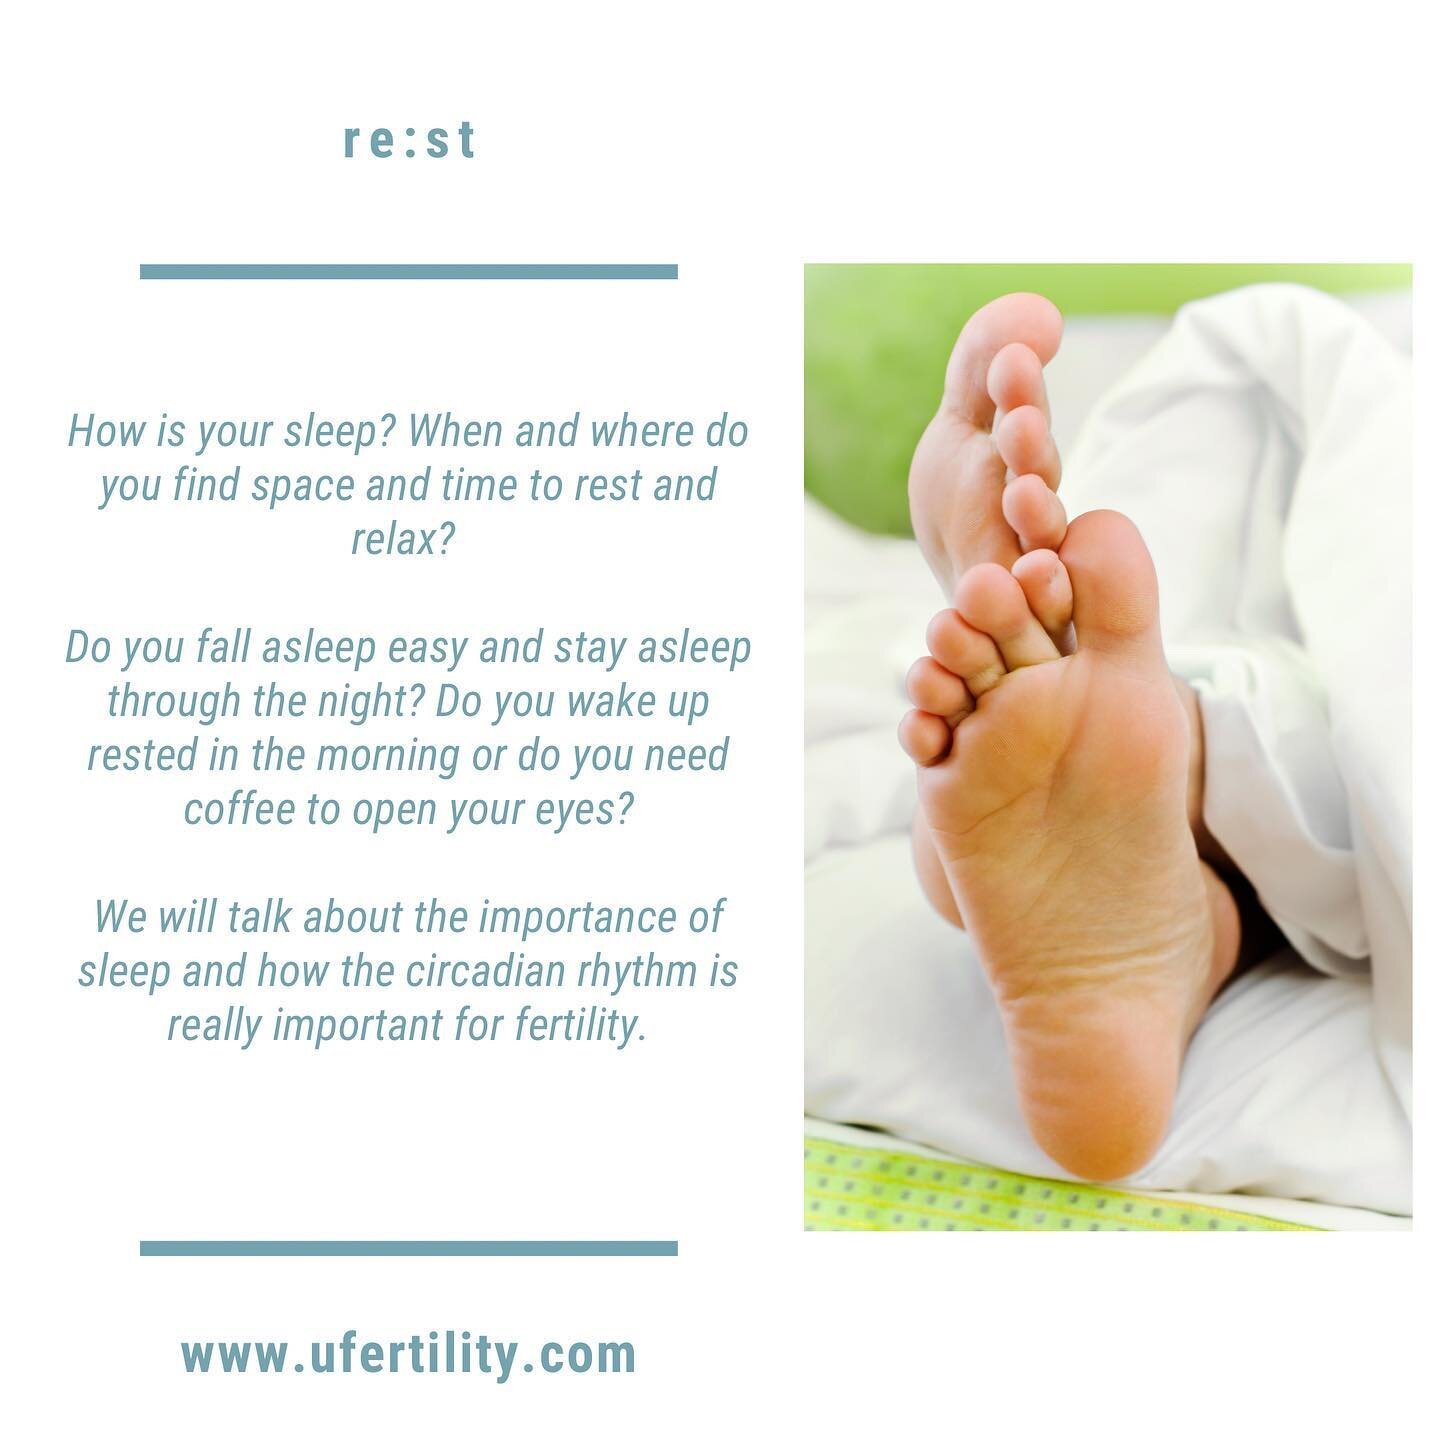 How is your sleep? When and where do you find space and time to rest and relax? Do you fall asleep easy and stay asleep through the night? Do you wake up rested in the morning or do you need coffee to open your eyes? 

We will talk about the importan